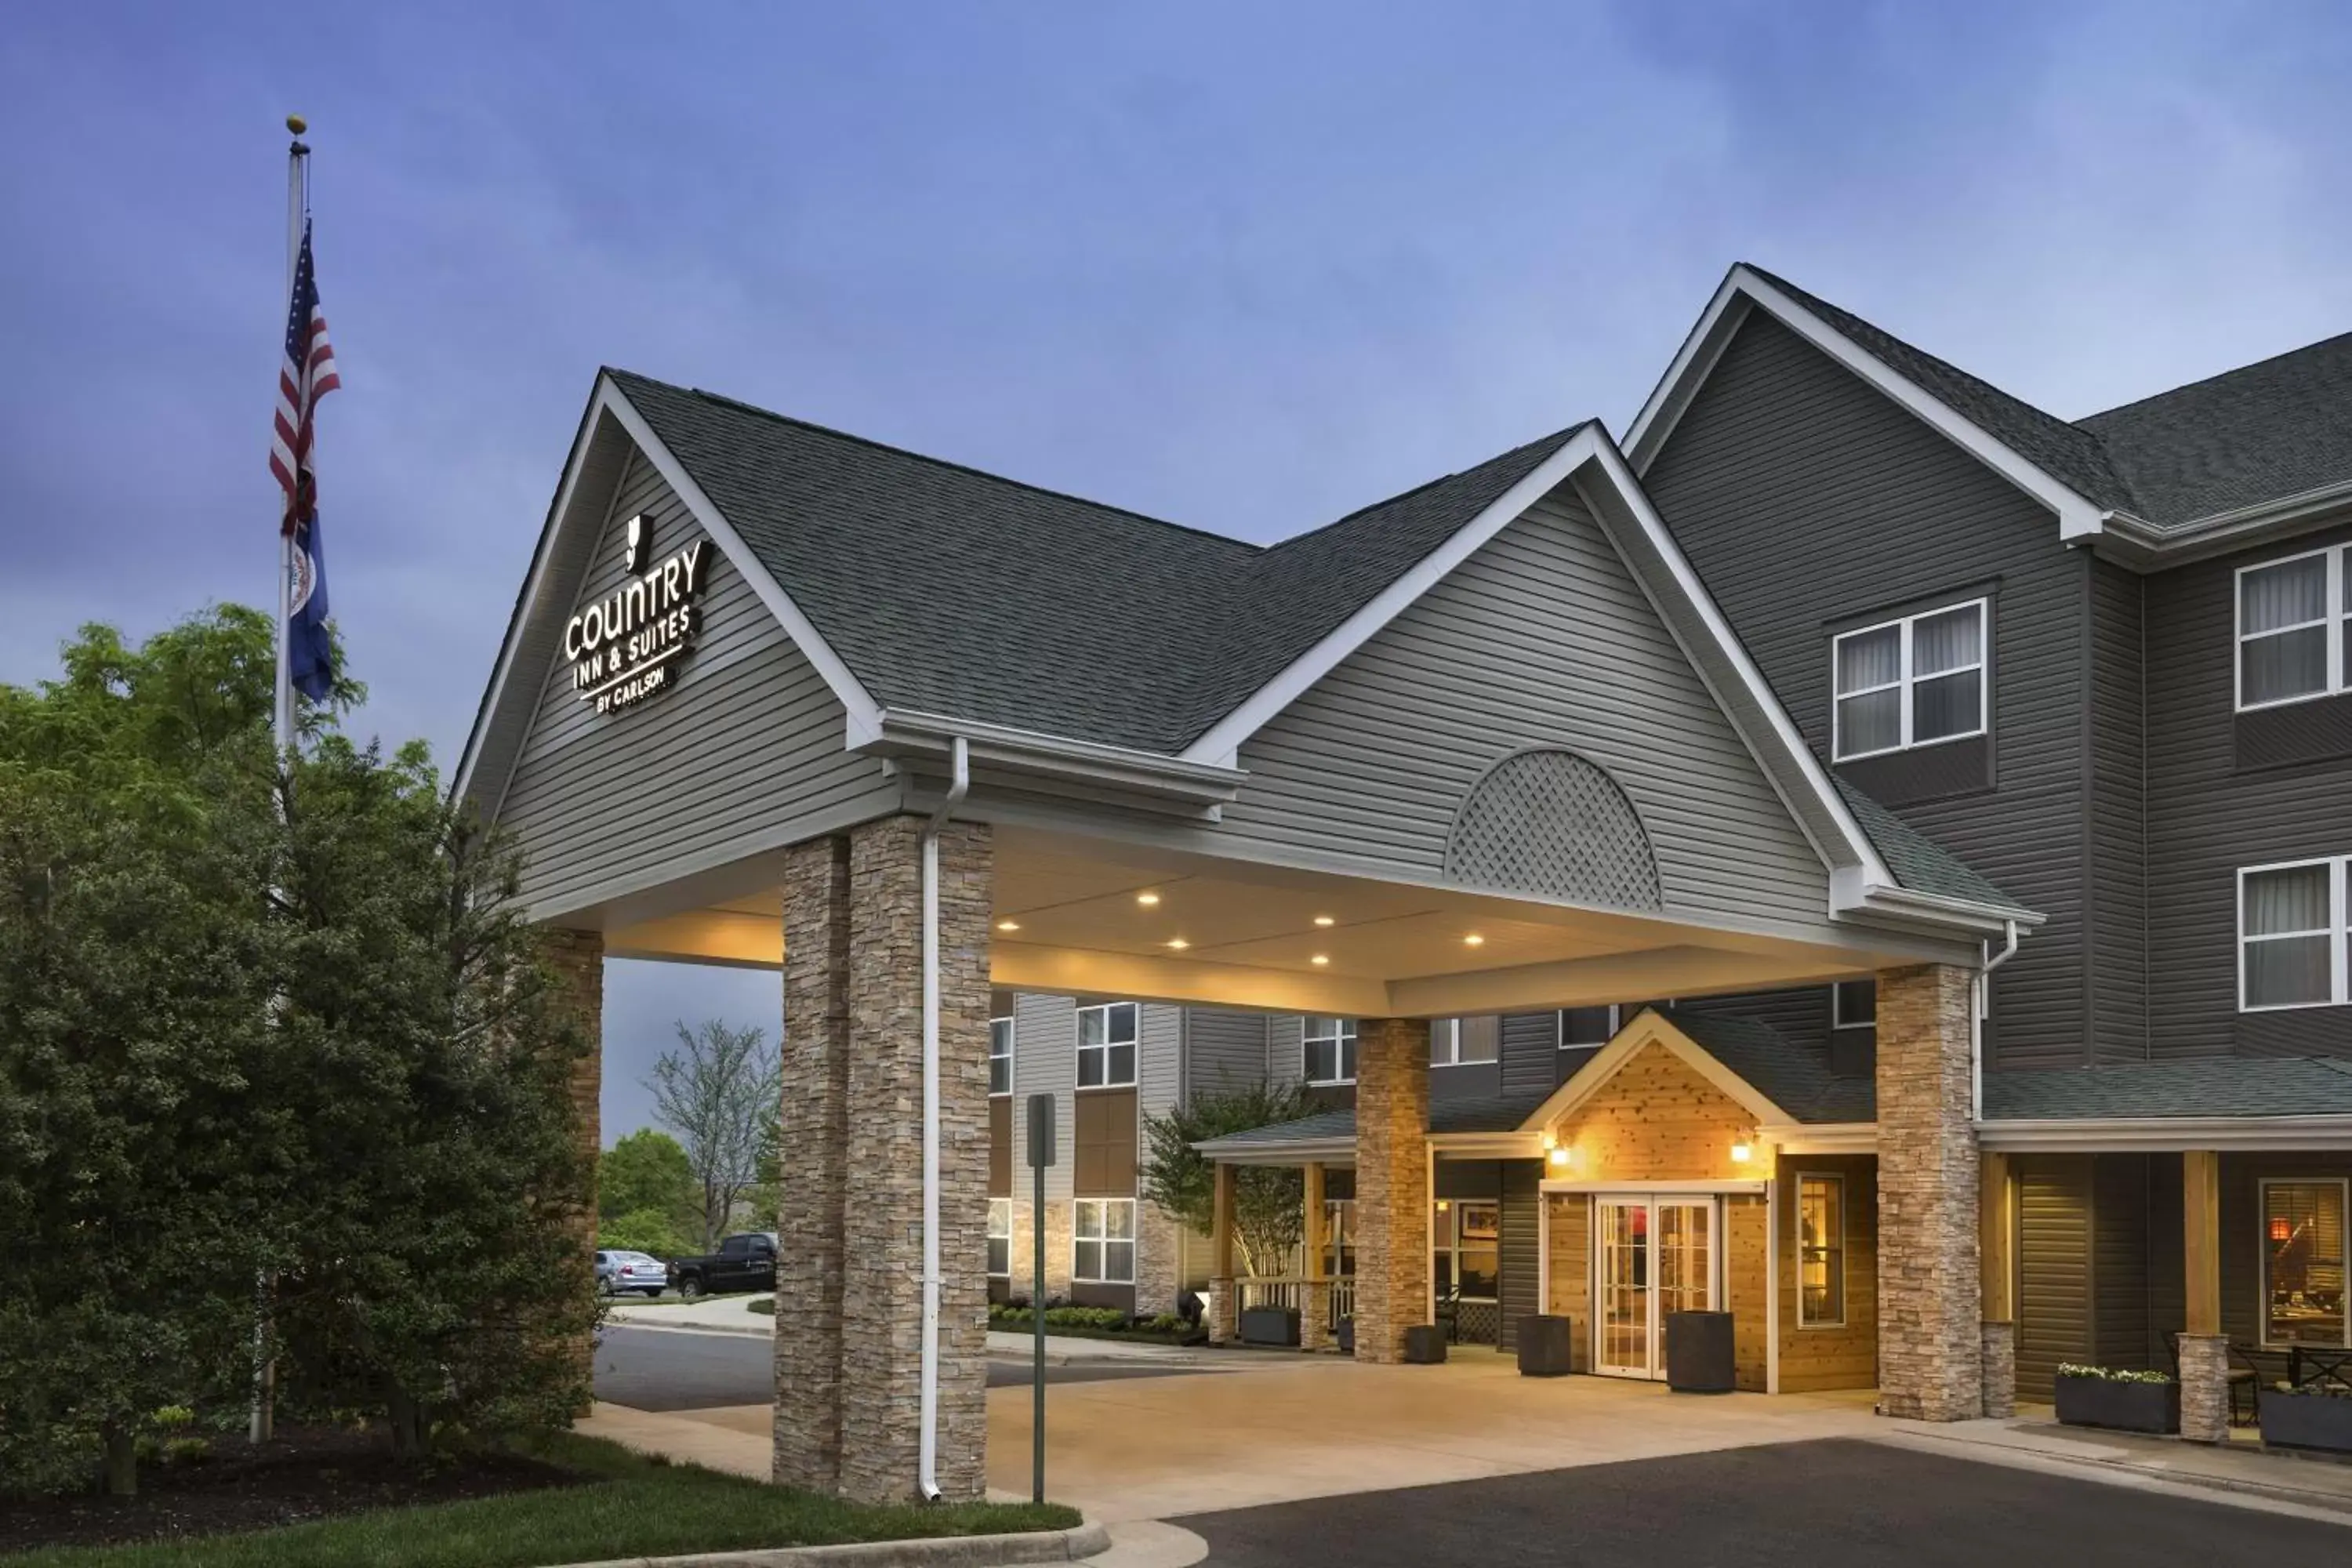 Street view, Facade/Entrance in Country Inn & Suites by Radisson, Washington Dulles International Airport, VA